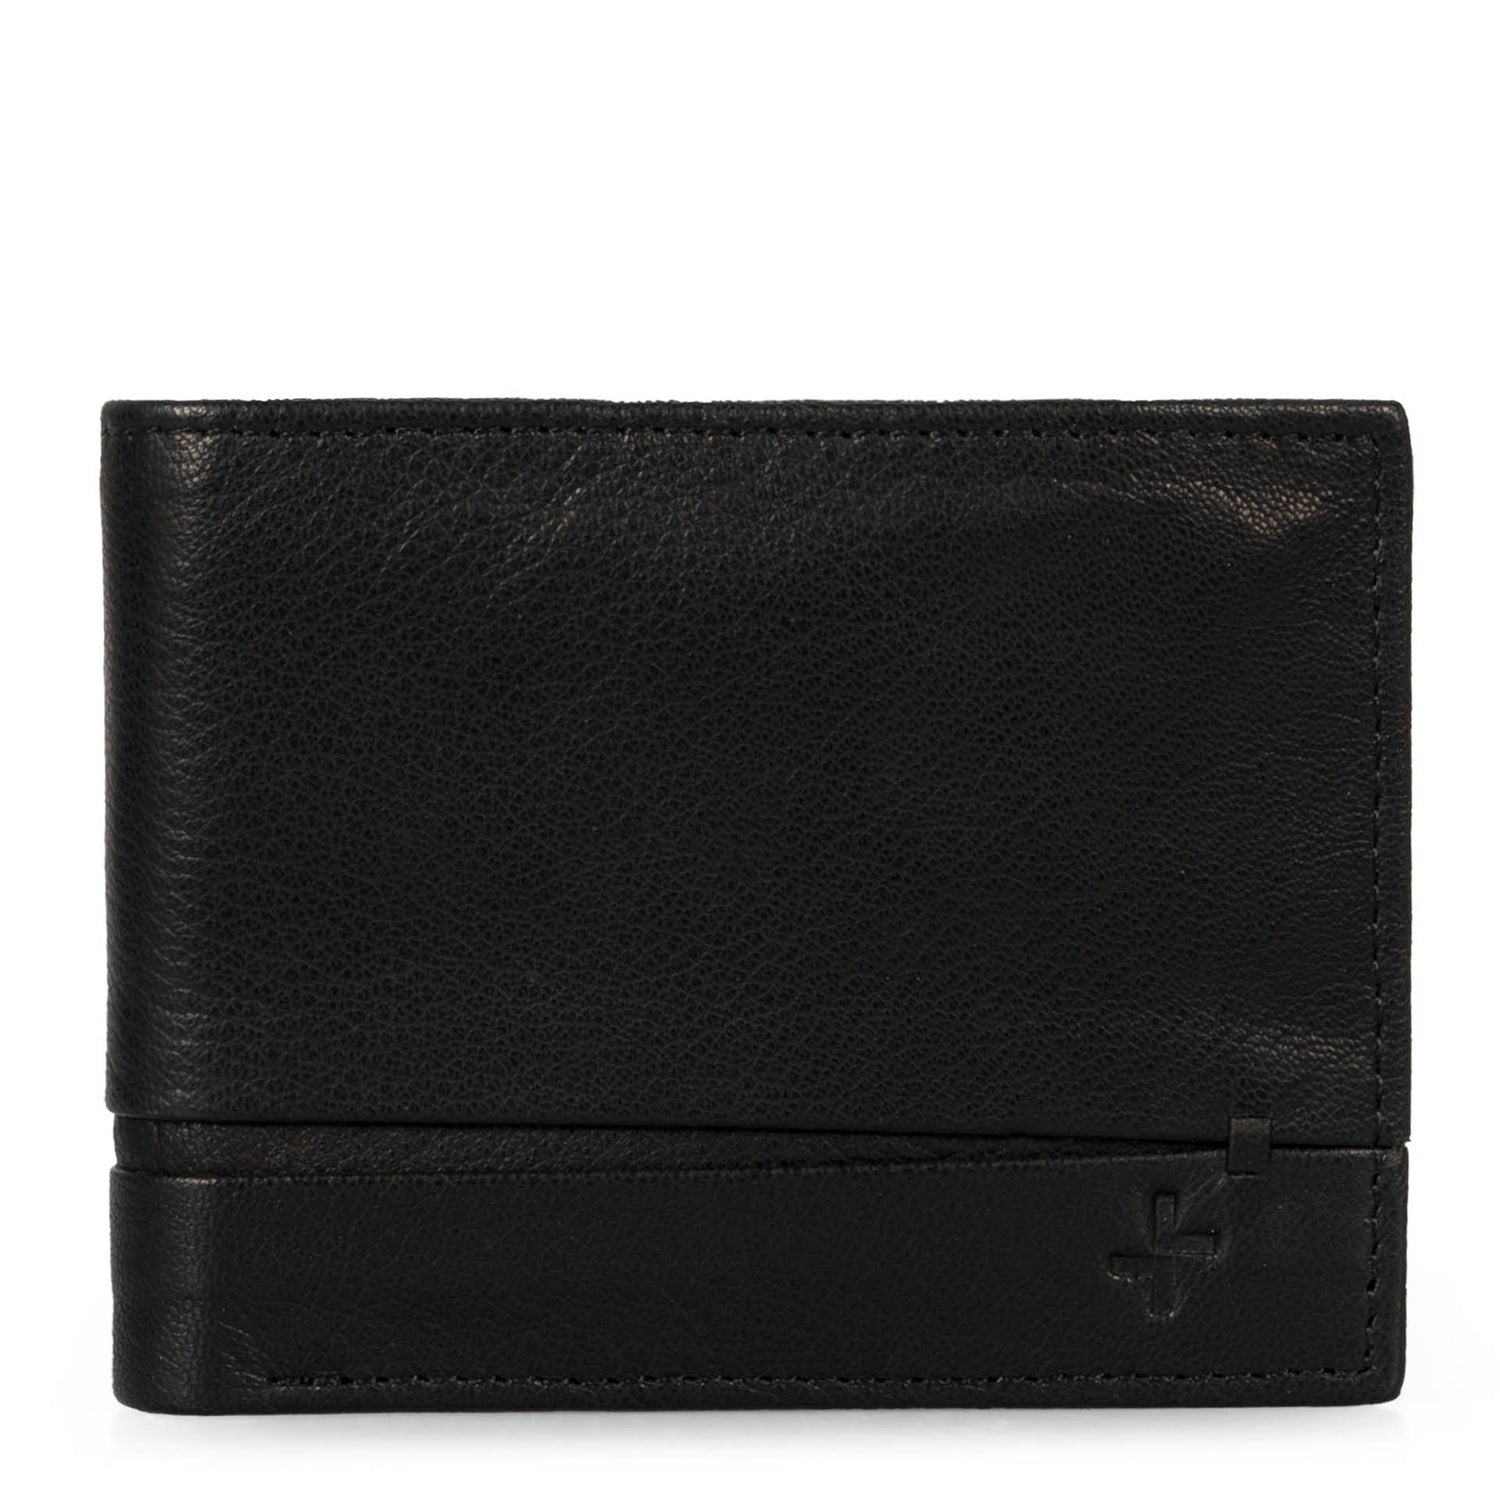 Front of a black leather wallet called Colwood designed by Pelle, showcasings its supple leather and tracker logo located at the bottom right corner.